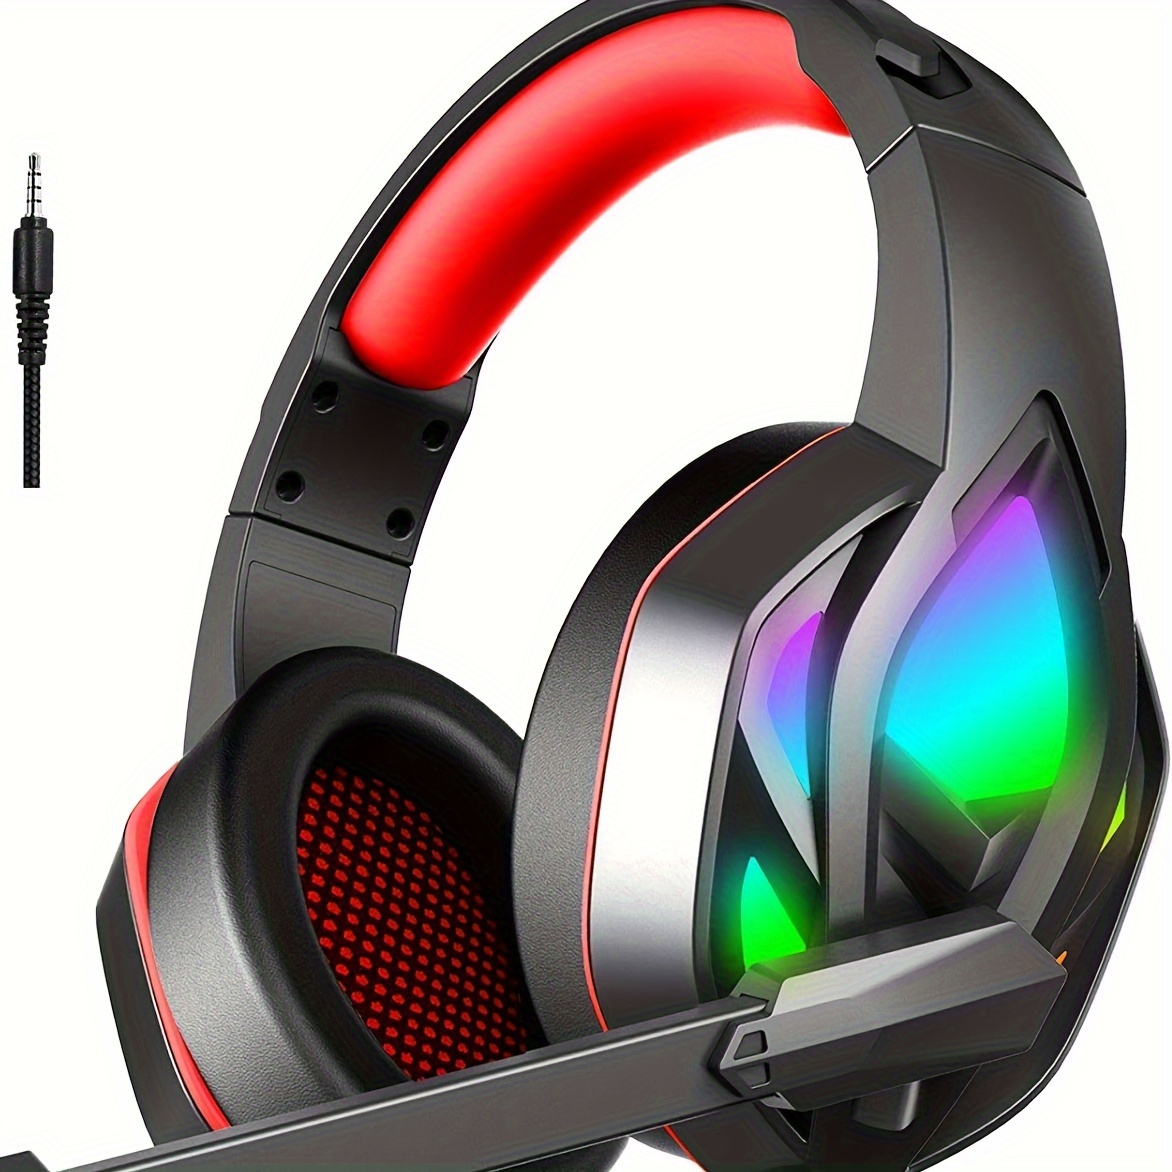 

H100 Gaming Headset, Over-ear Gaming Headphones With Noise Canceling Mic, Stereo Bass Surround Sound, Soft Memory Earmuffs Led Light Headset Compatible With Pc, Laptop, Ps4, Ps5, Red